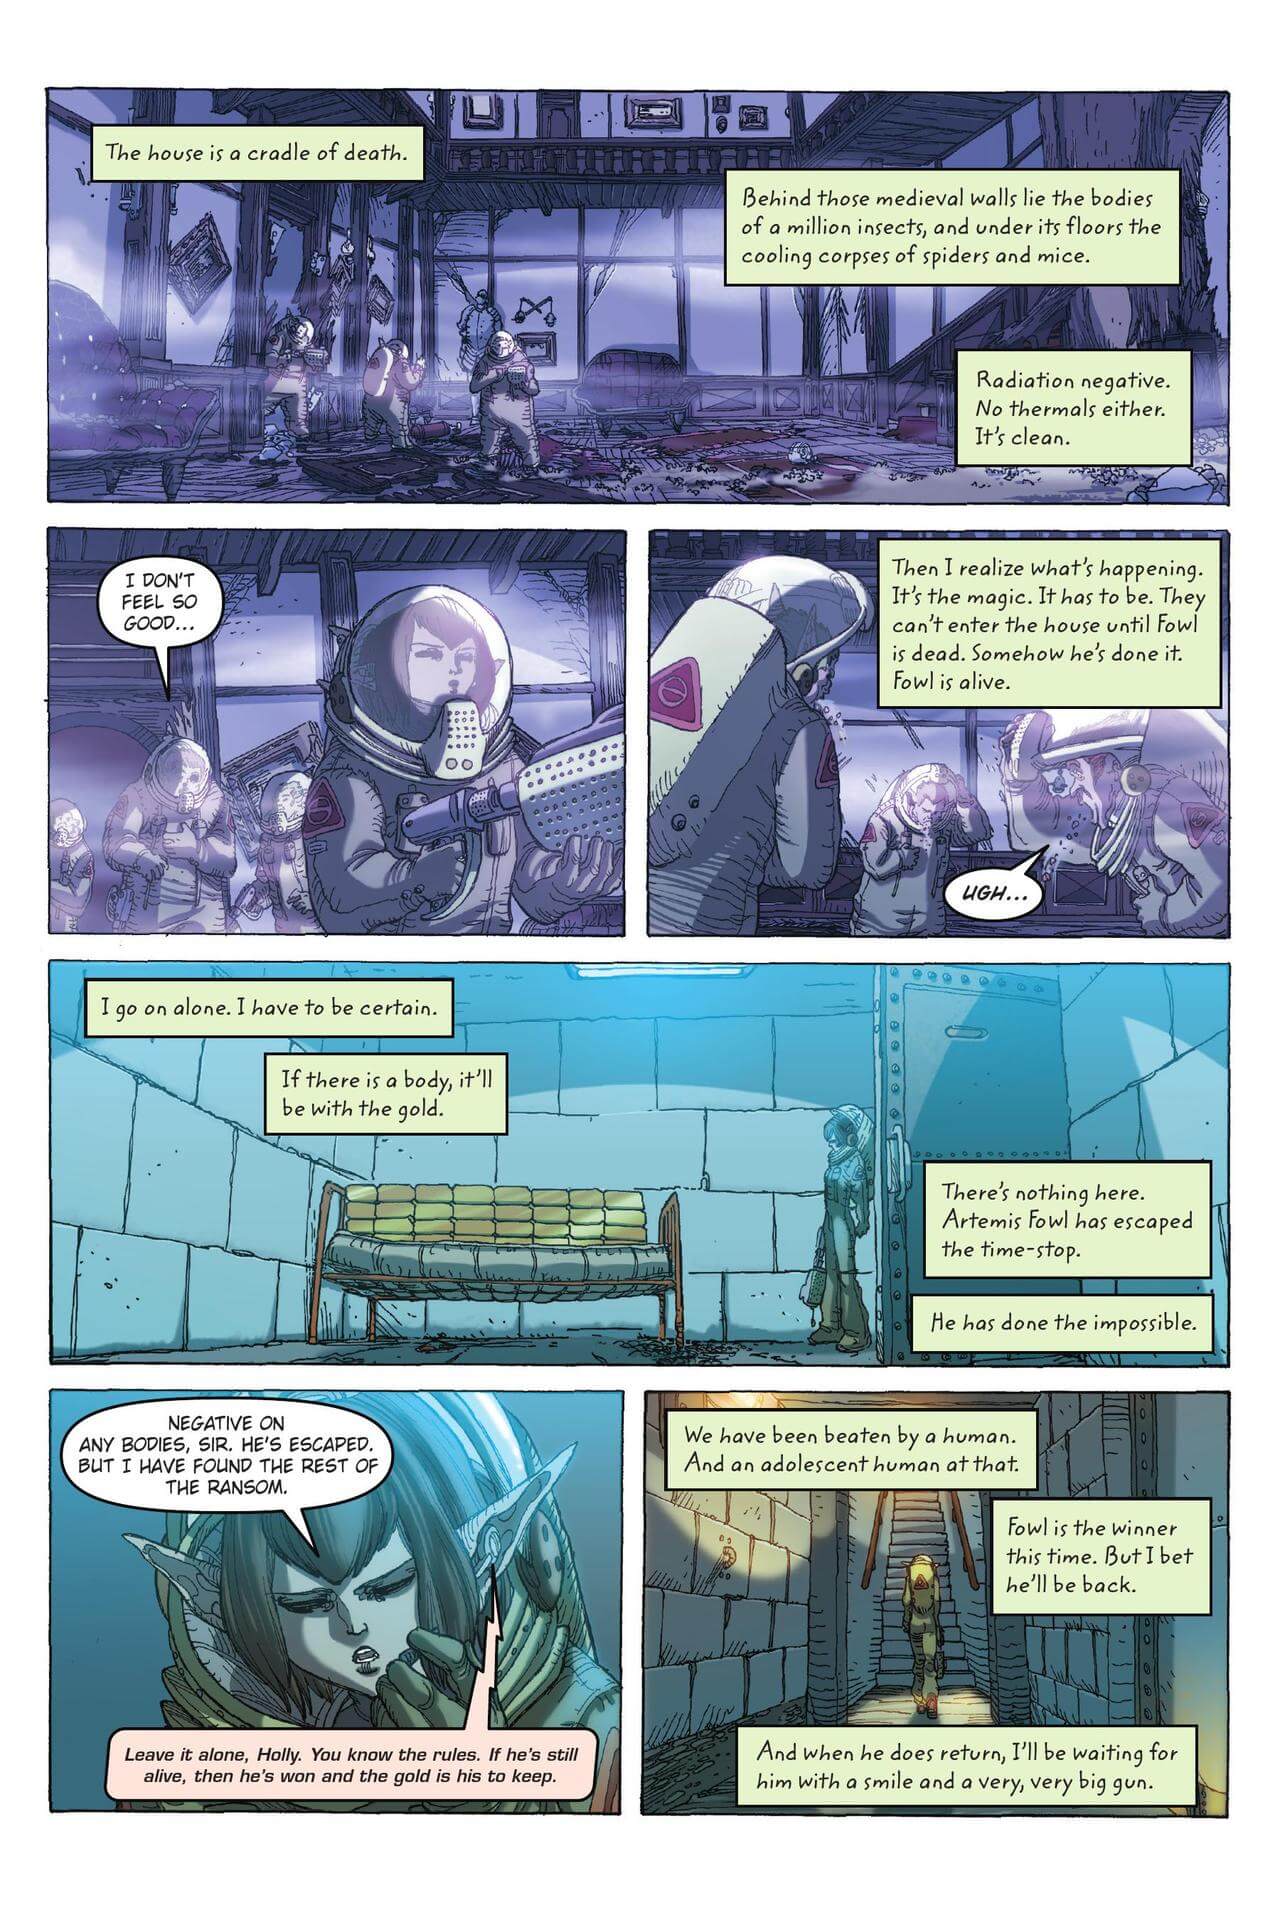 page 106 of artemis fowl the graphic novel